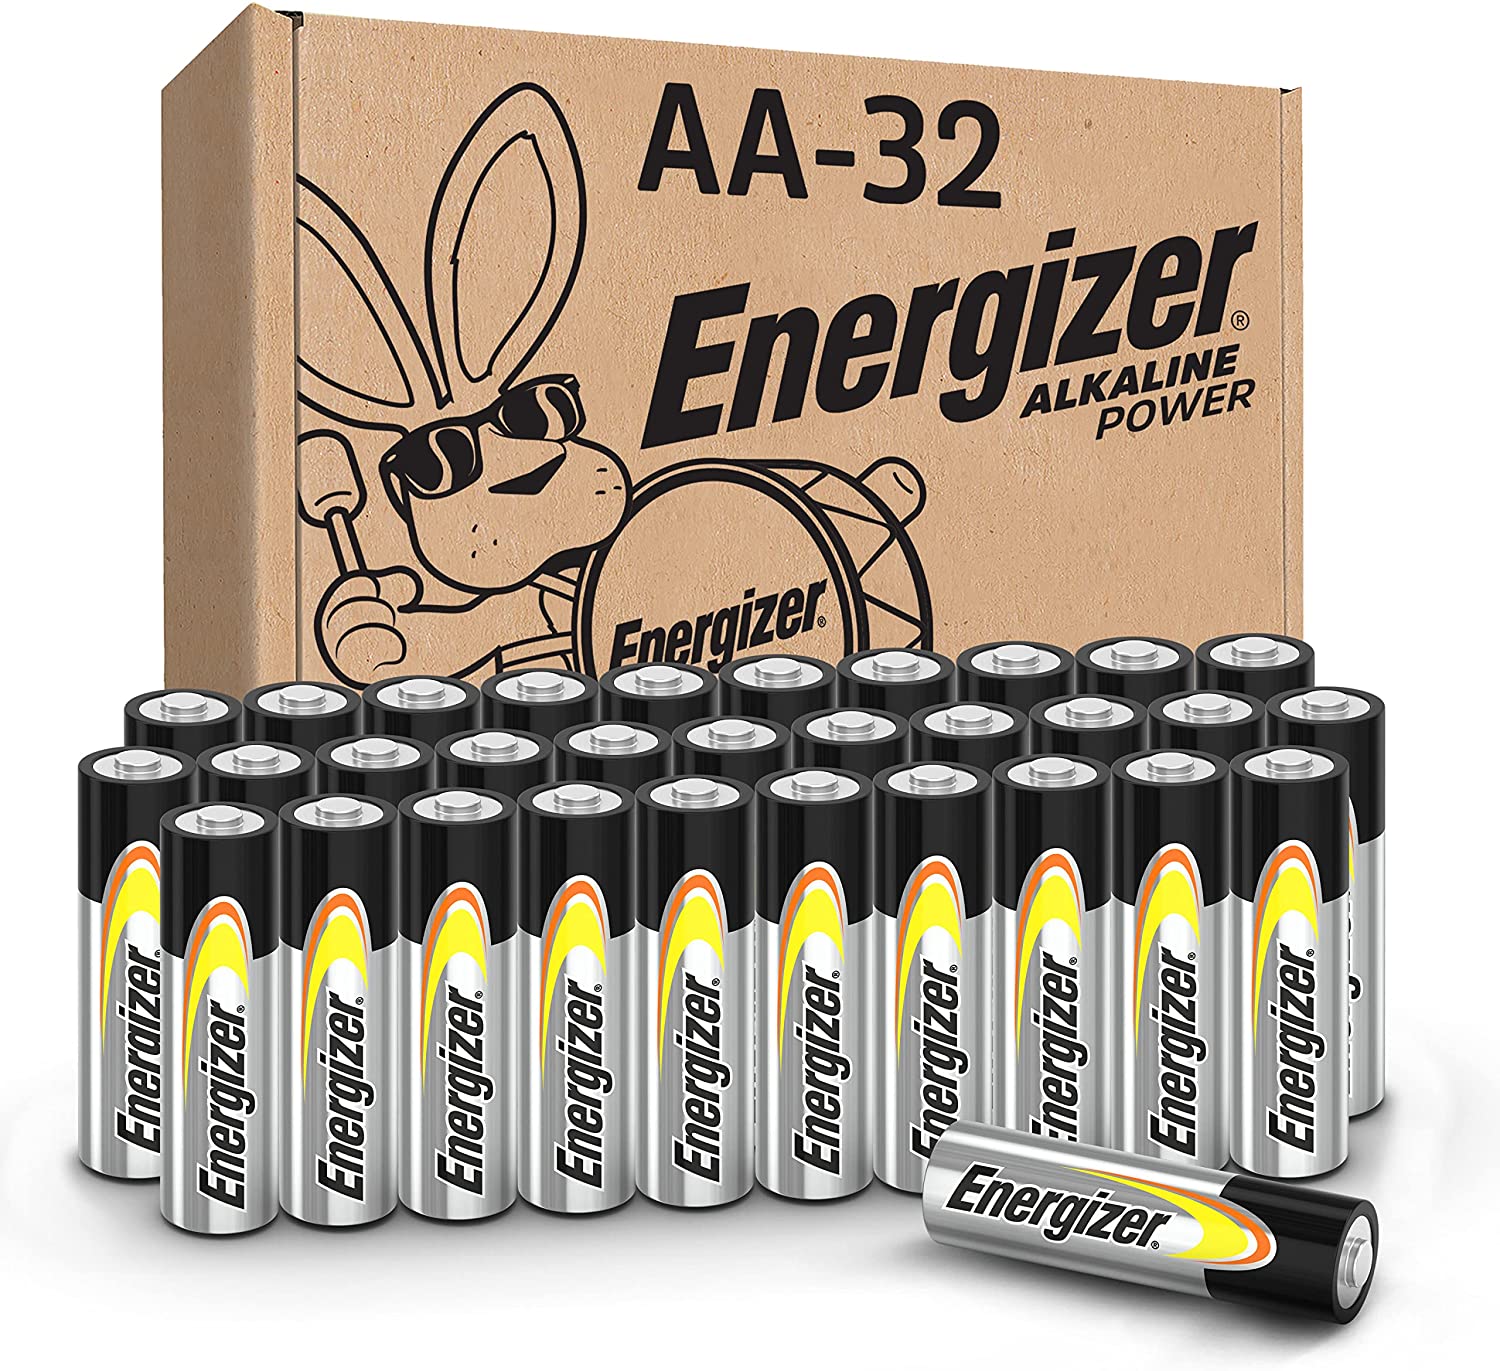 YMMV With coupon from first S&S order: (32 Pack) Energizer AA Batteries, Double A Long-Lasting Alkaline Power Batteries $14.14